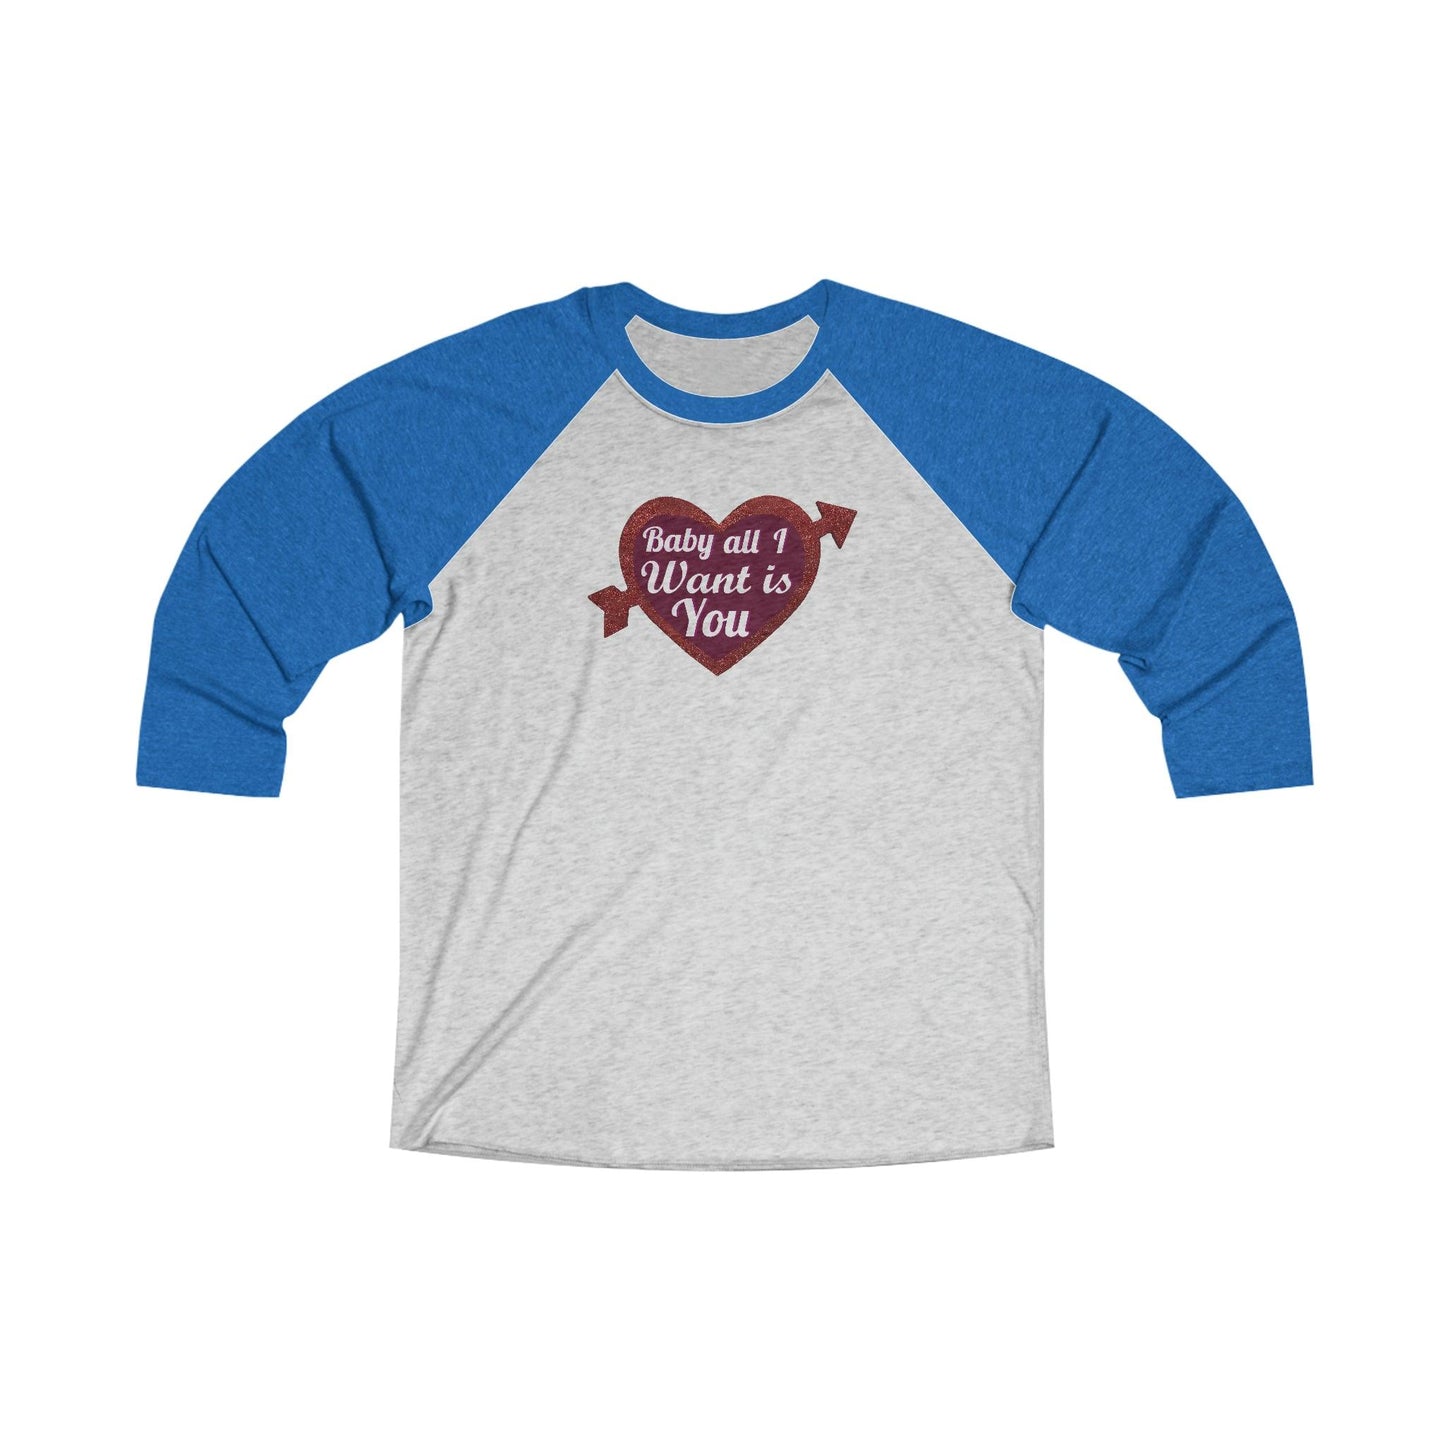 Baby All I Want is You Tri-Blend 34 Raglan Tee